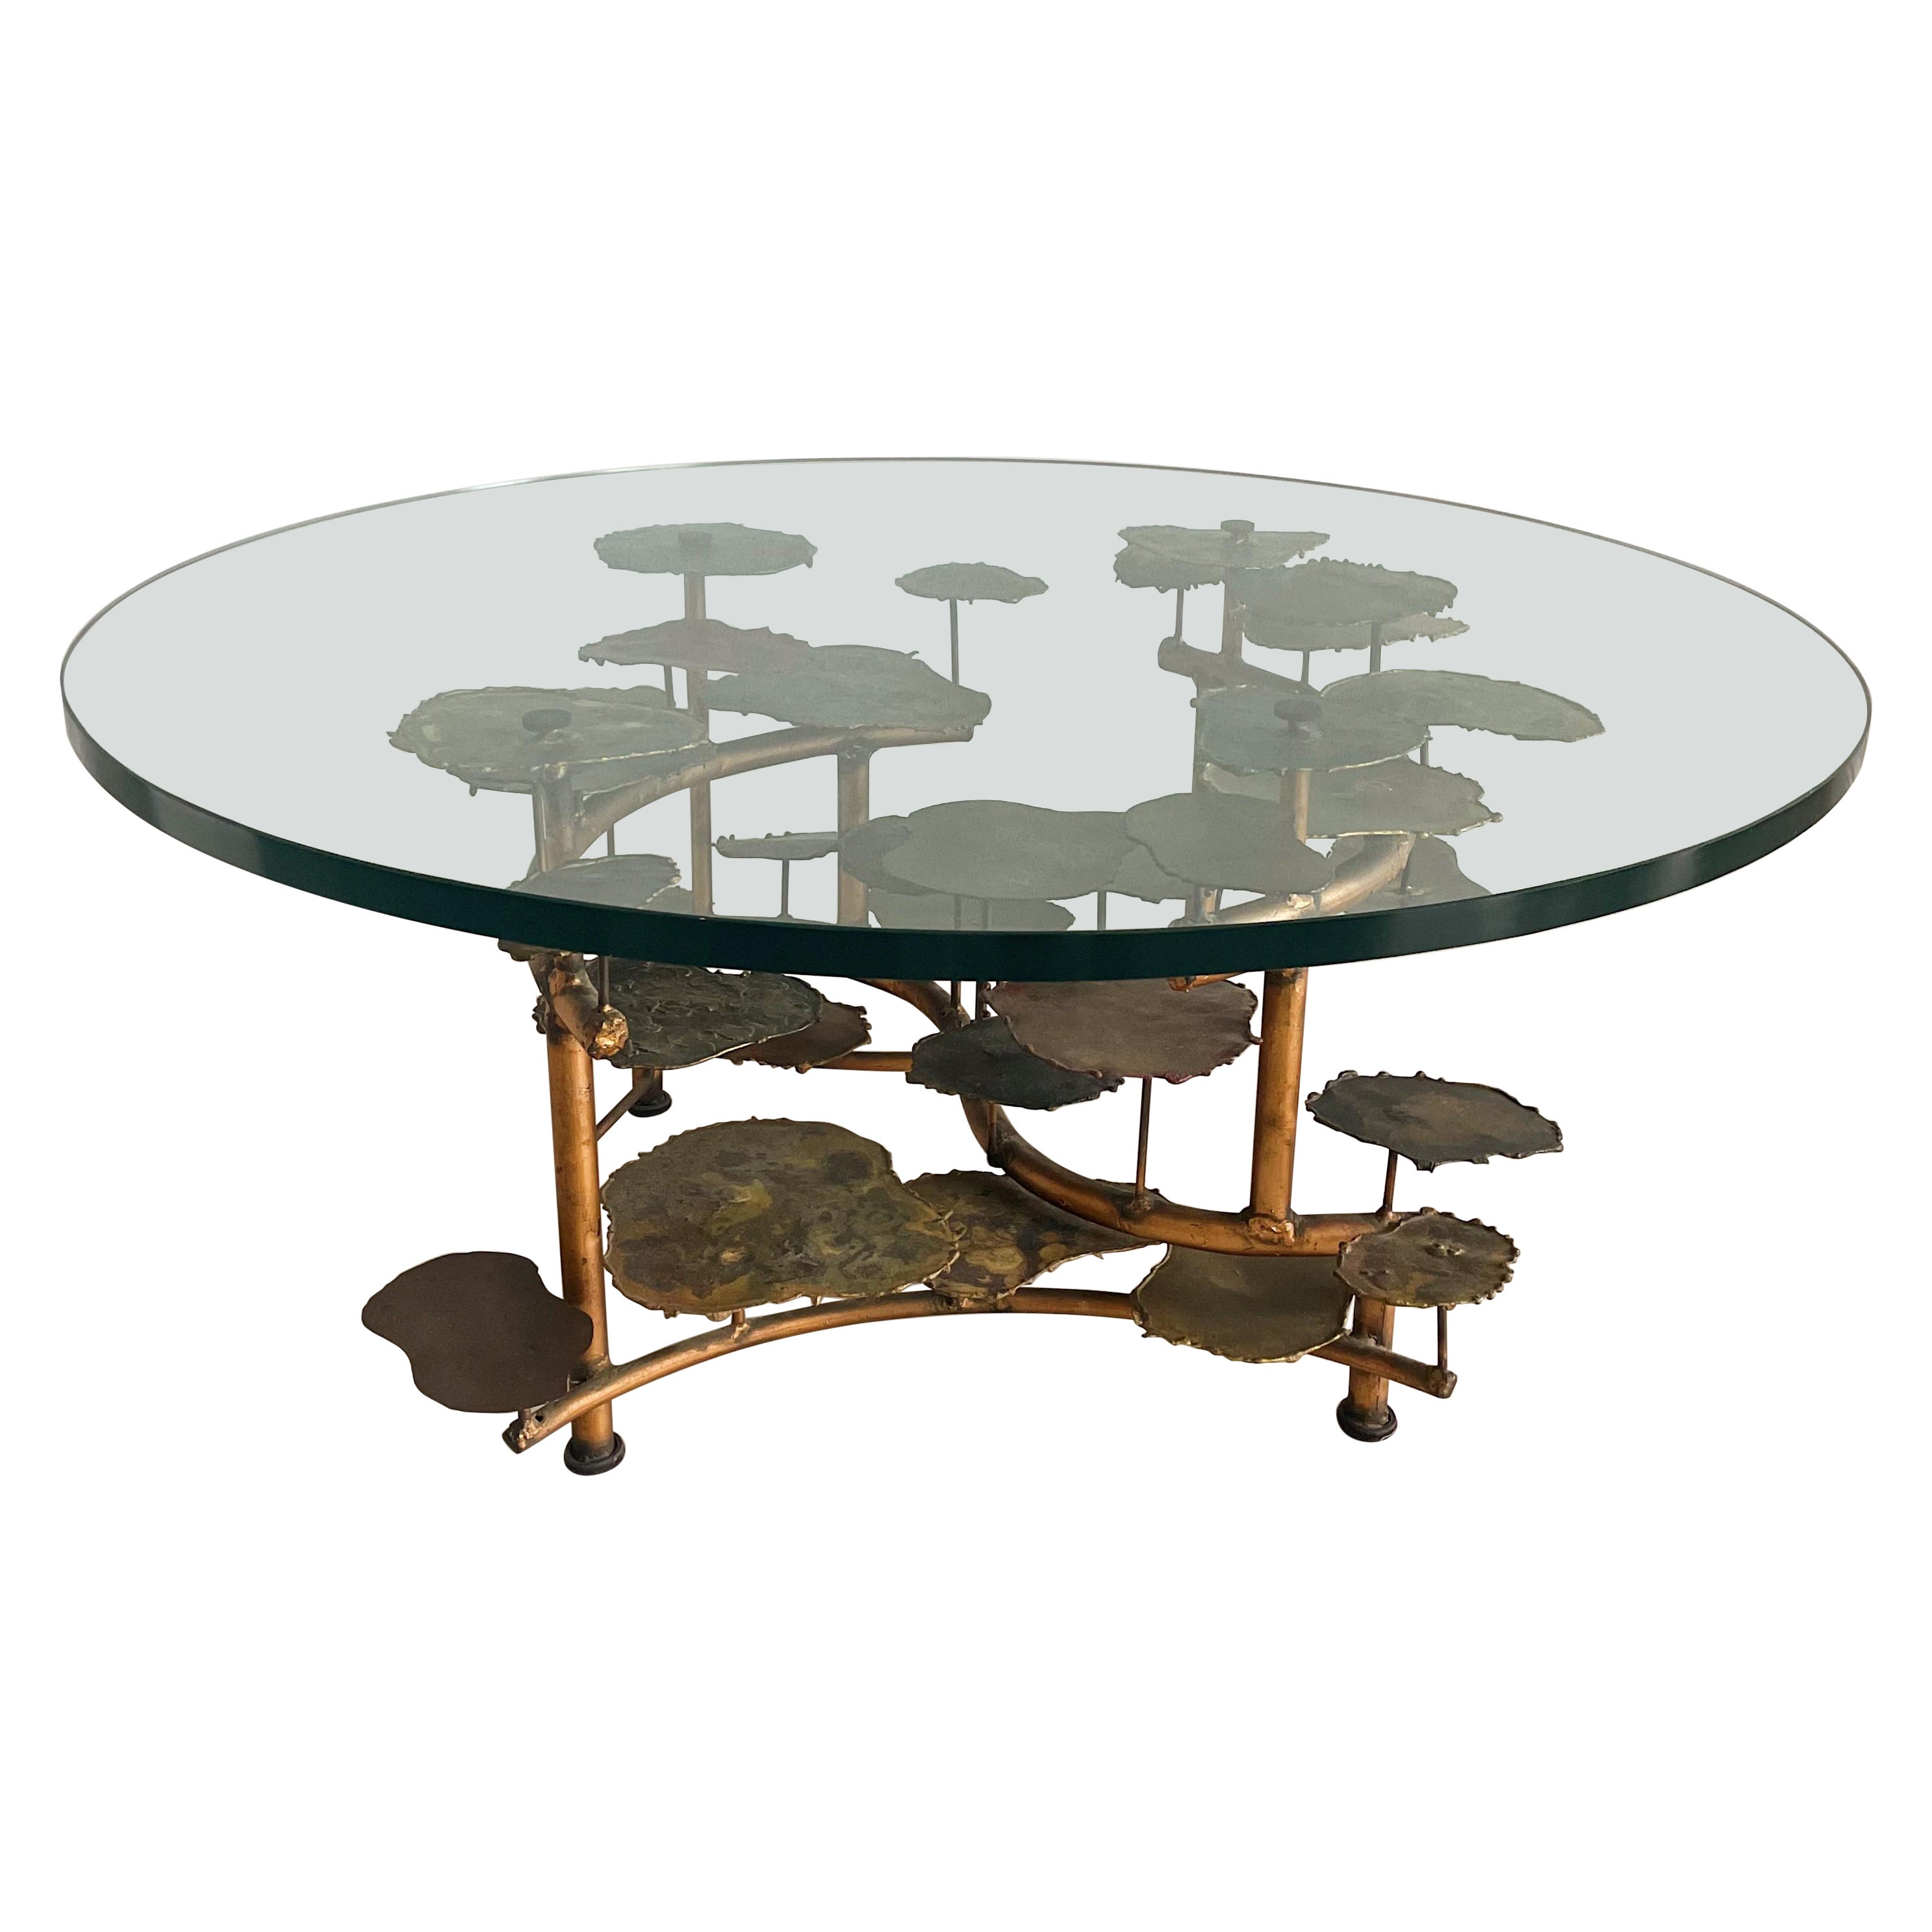 Silas Seandal Lily Pad Mixed Metal Vintage Coffee Table